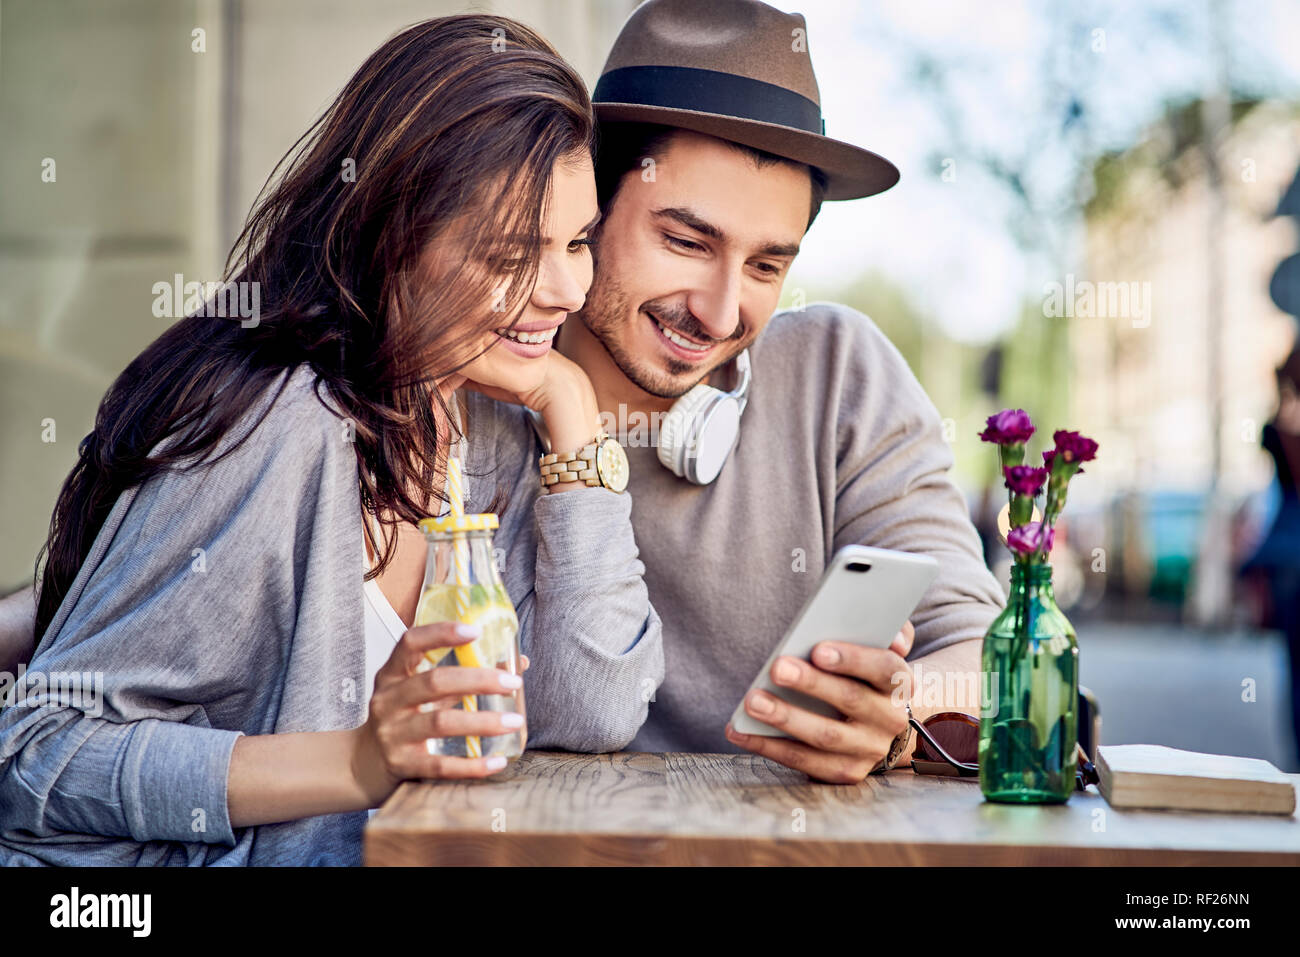 Happy young couple looking at cell phone at outdoors cafe Stock Photo